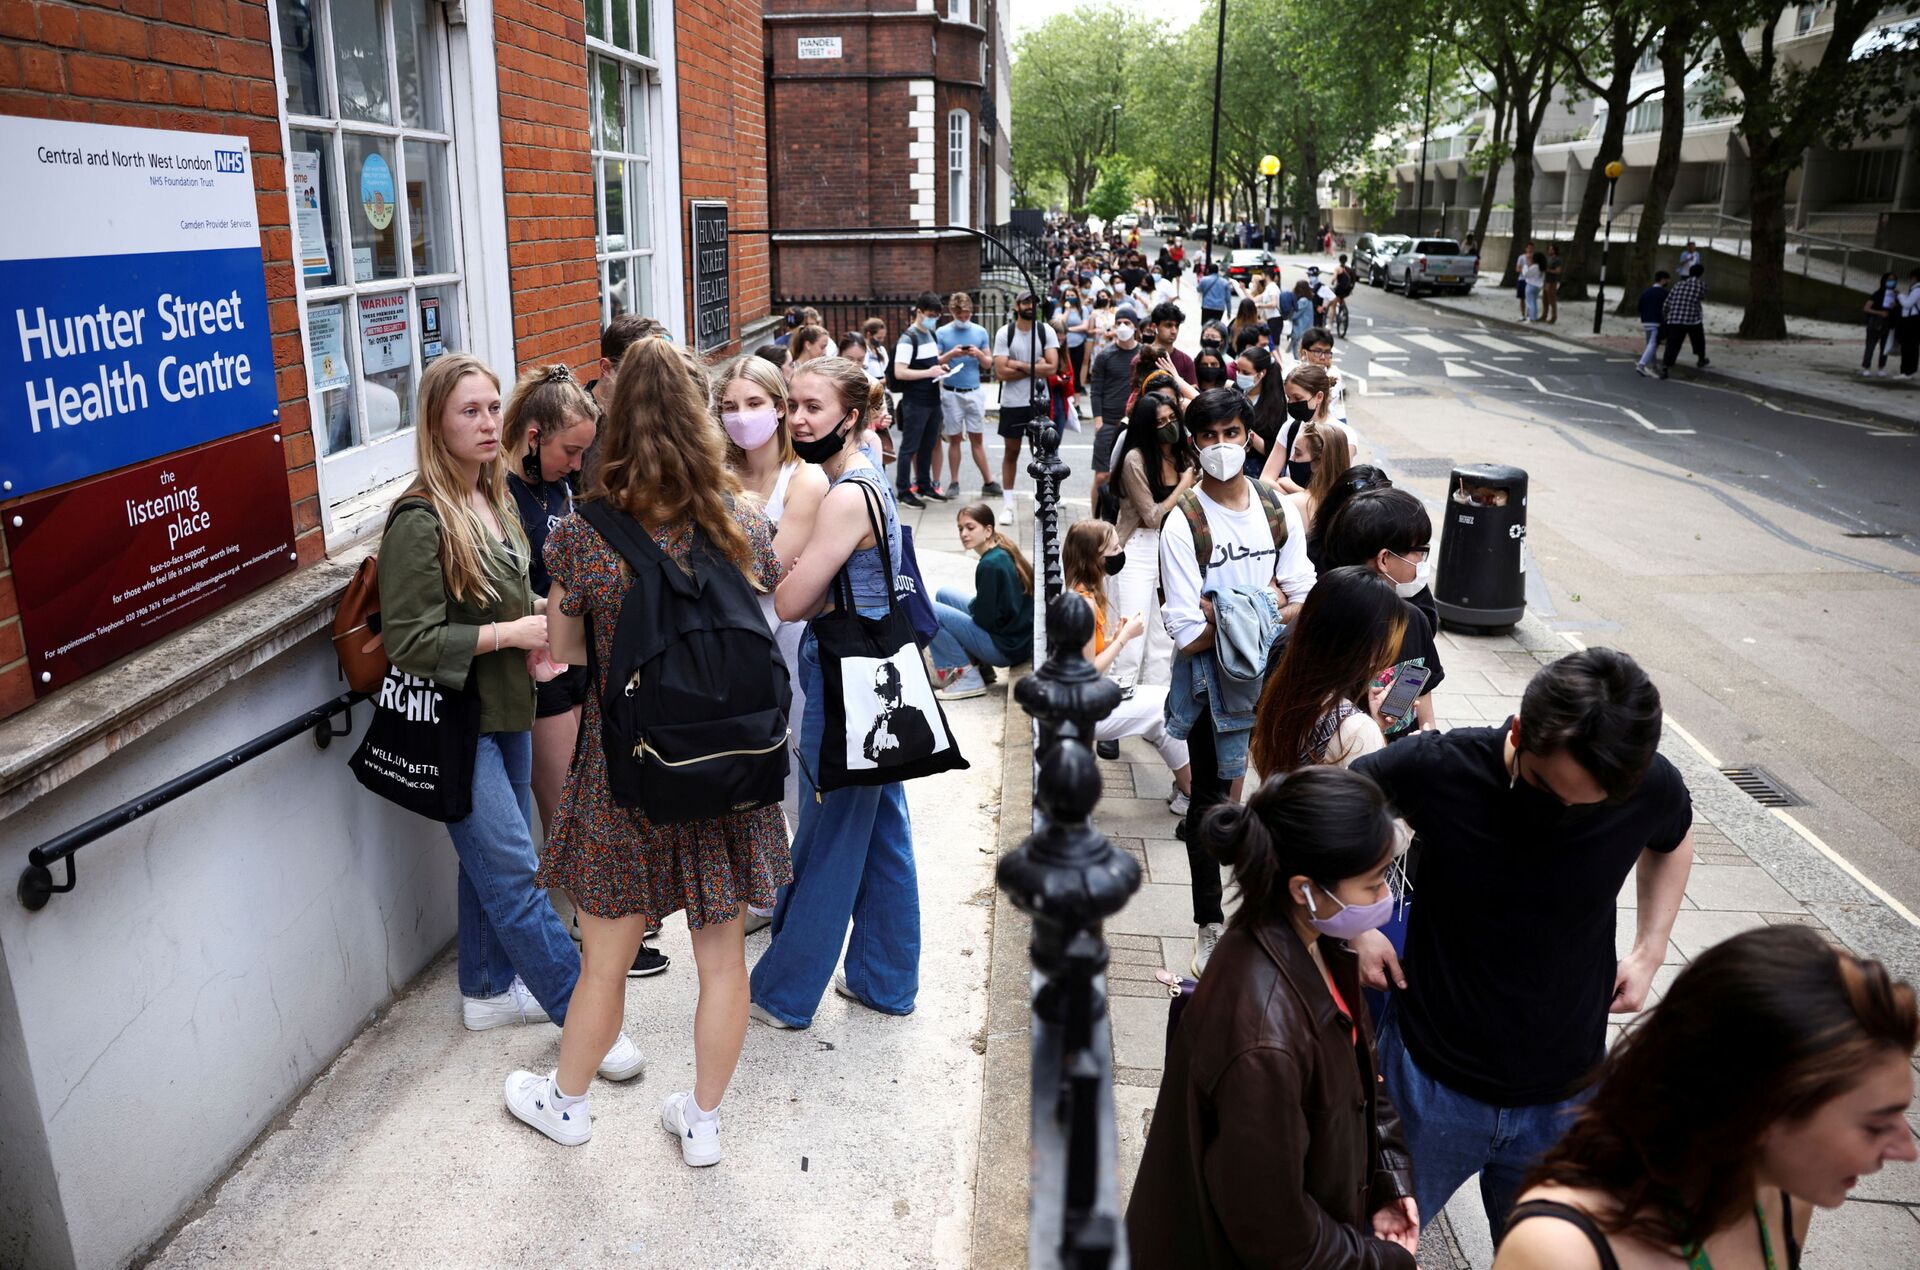 FILE PHOTO: People queue outside a vaccination centre for young people and students at the Hunter Street Health Centre, amid the coronavirus disease (COVID-19) outbreak, in London, Britain, June 5, 2021 - Sputnik International, 1920, 07.09.2021